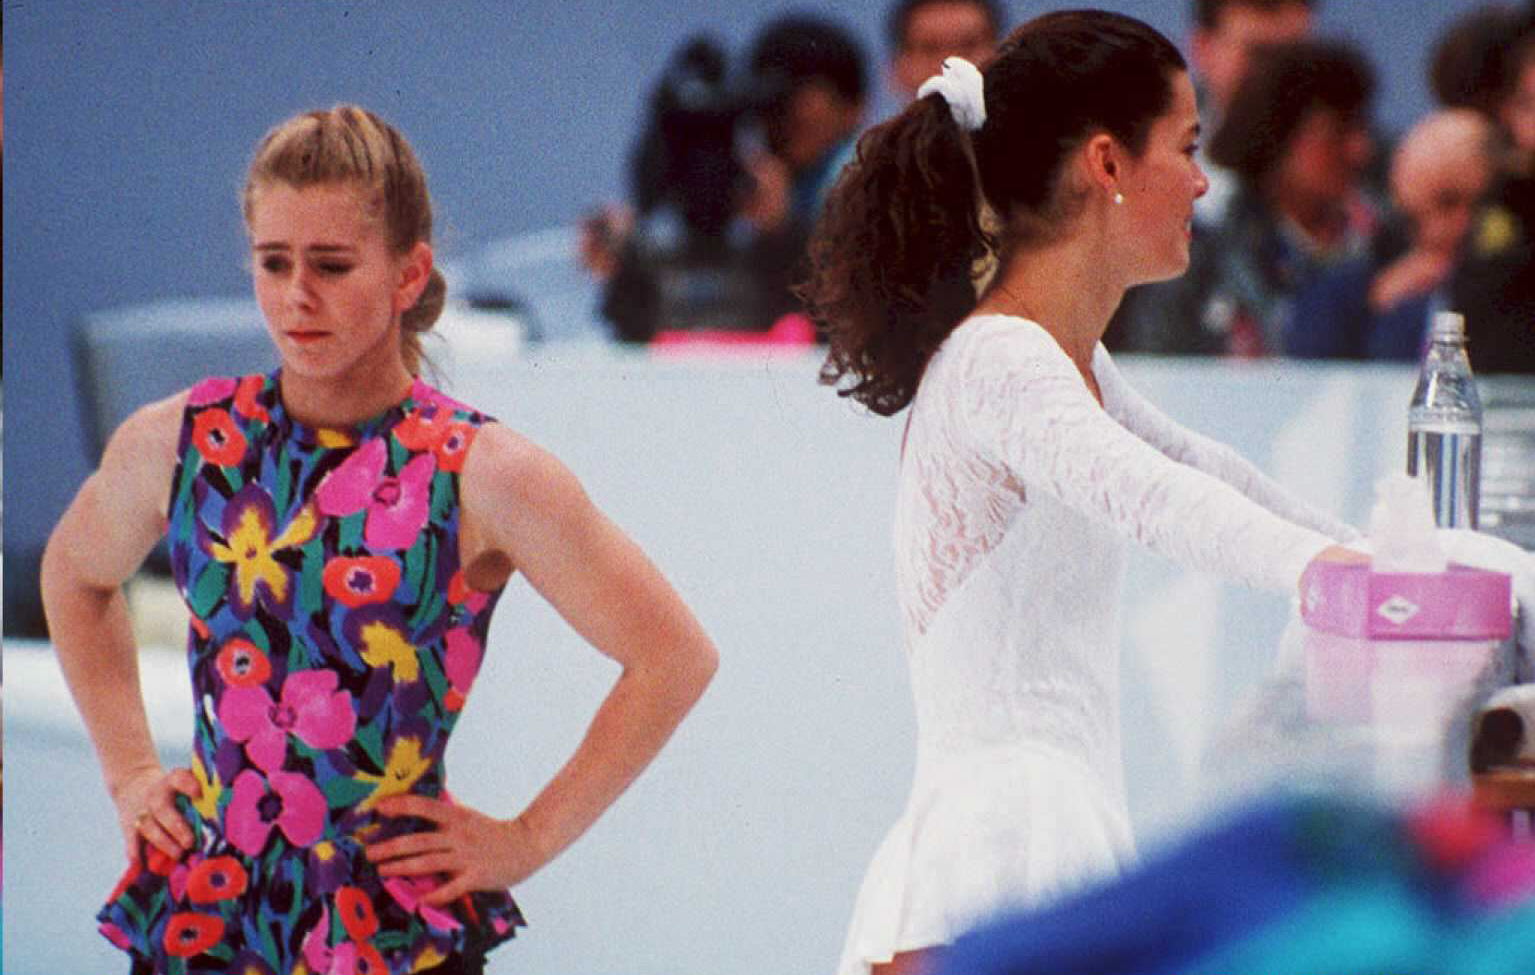 U.S. figure skaters Tonya Harding (L) and Nancy Kerrigan avoid each other during a training session on Feb. 17 in Hamar, Norway, during the 1994 Winter Olympics. (VINCENT ALMAVY&mdash;AFP/Getty Images)